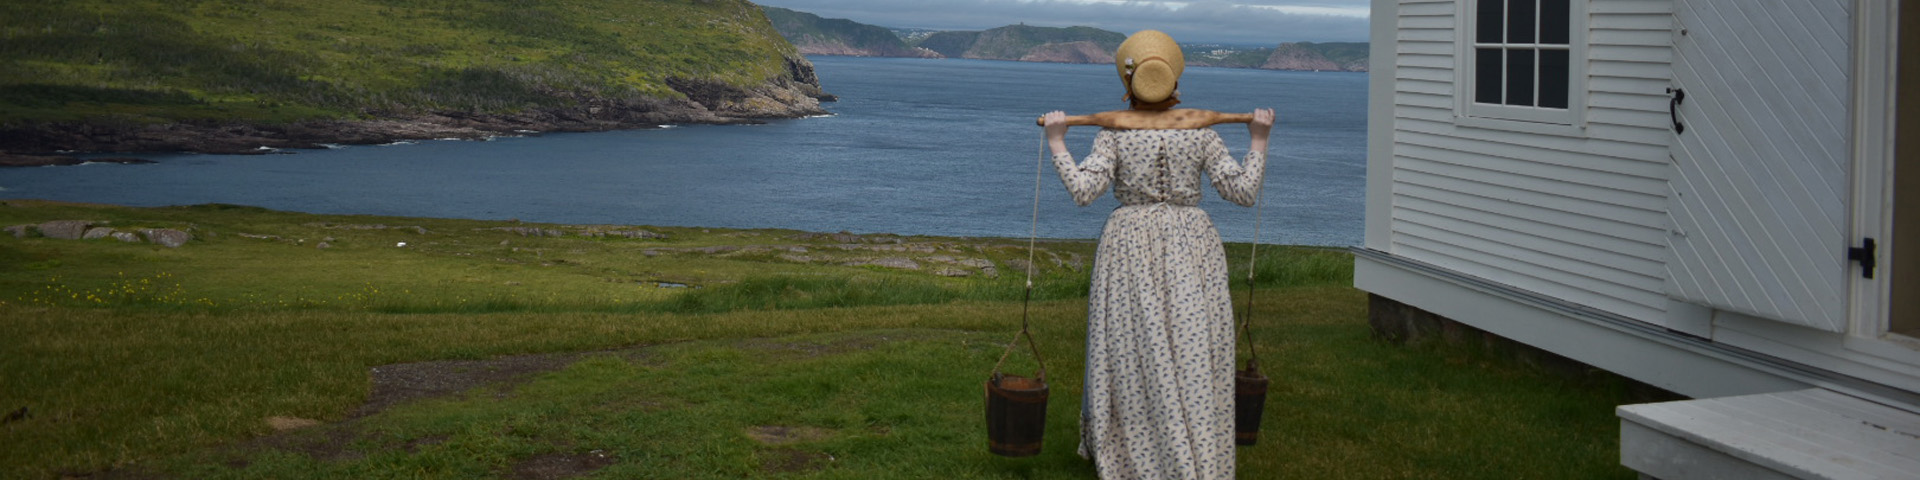 a woman in historic costume carrying water looks at a  a coastal view by a lighthouse